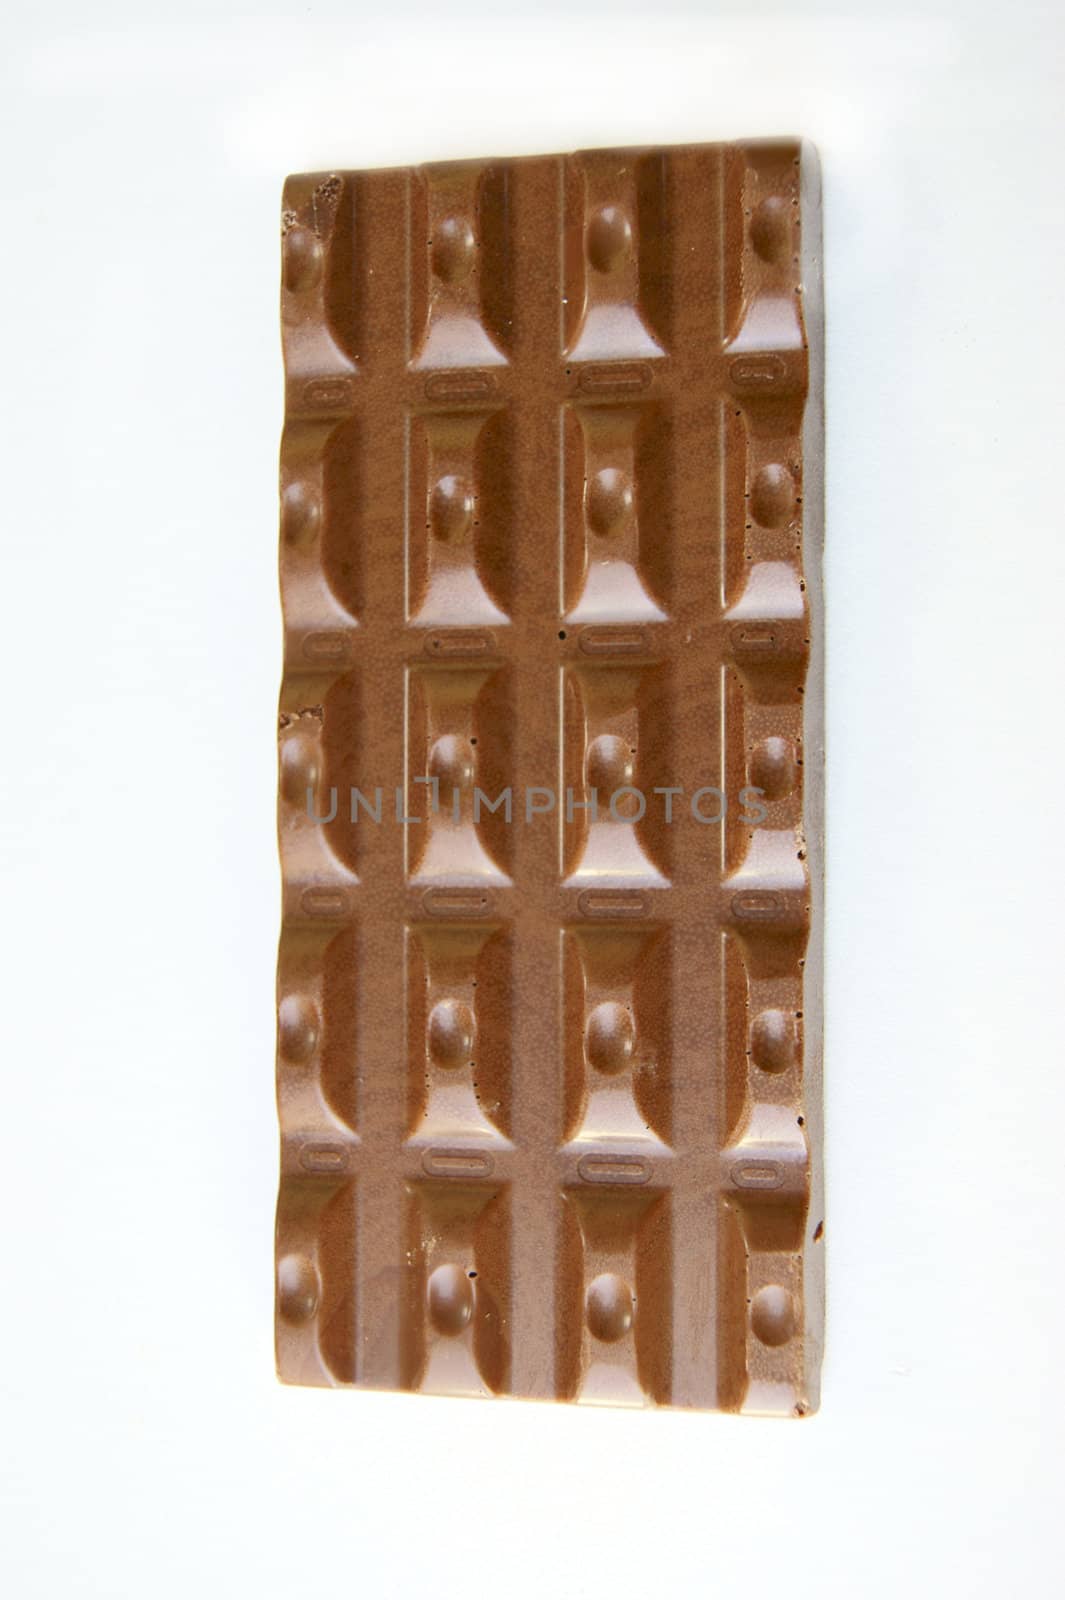 Aiming bar of chocolate on white background is insulated